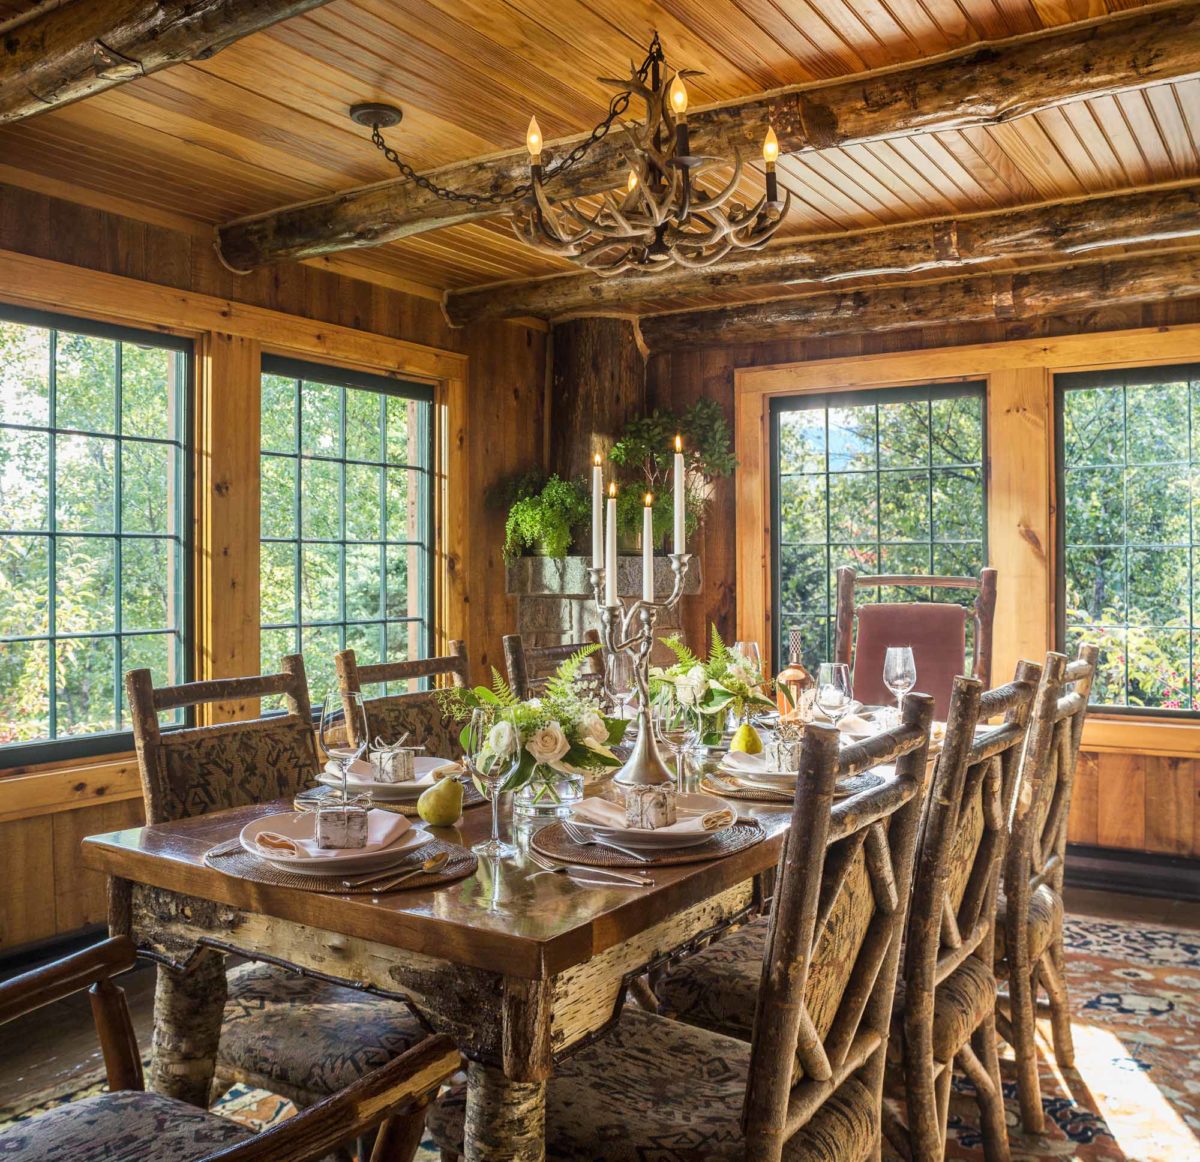 Lodge dining table. - The Whiteface Lodge